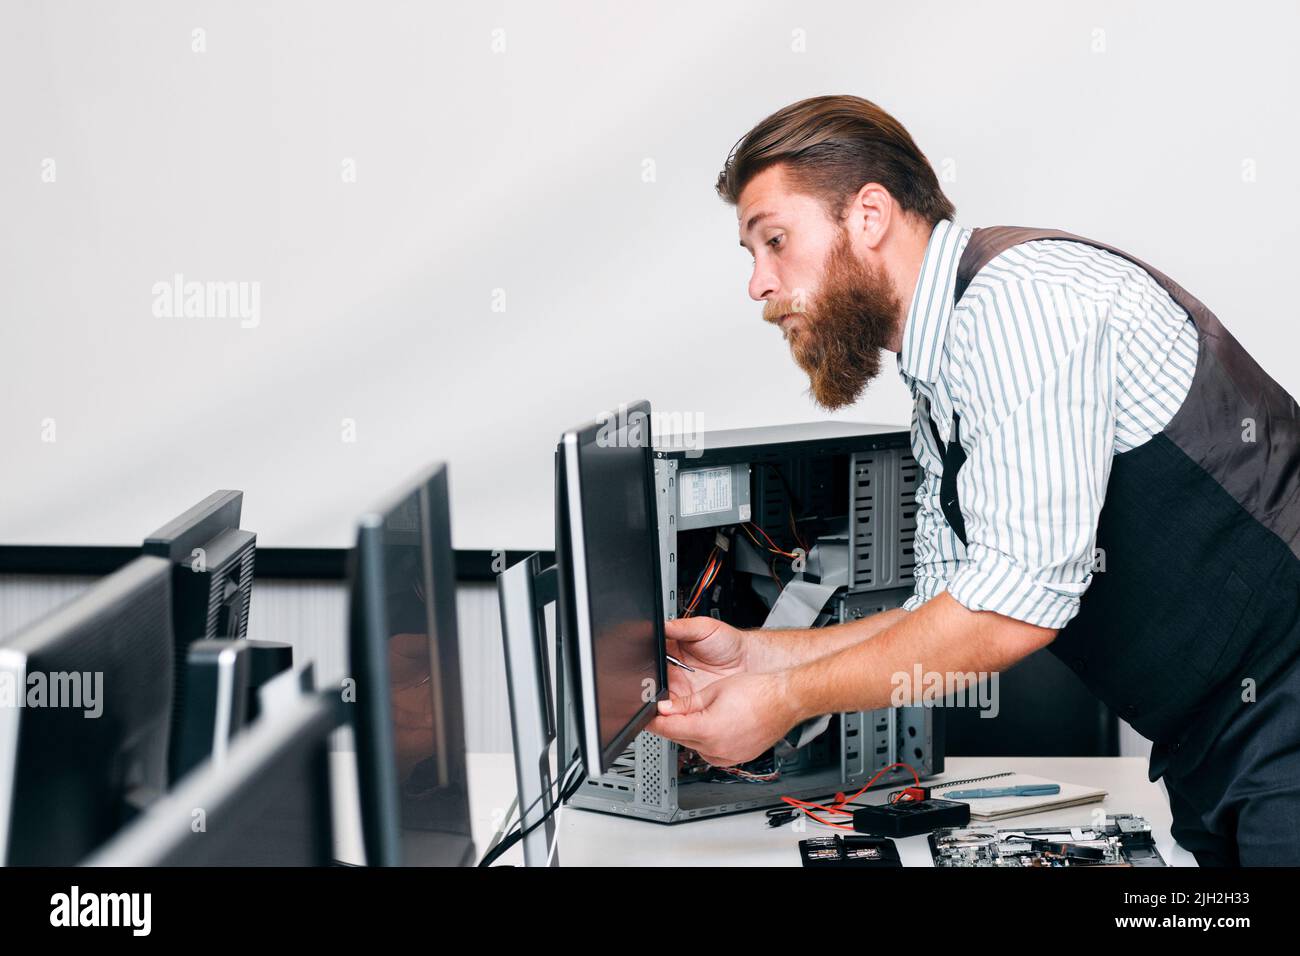 Programmer connecting monitor and CPU in office Stock Photo